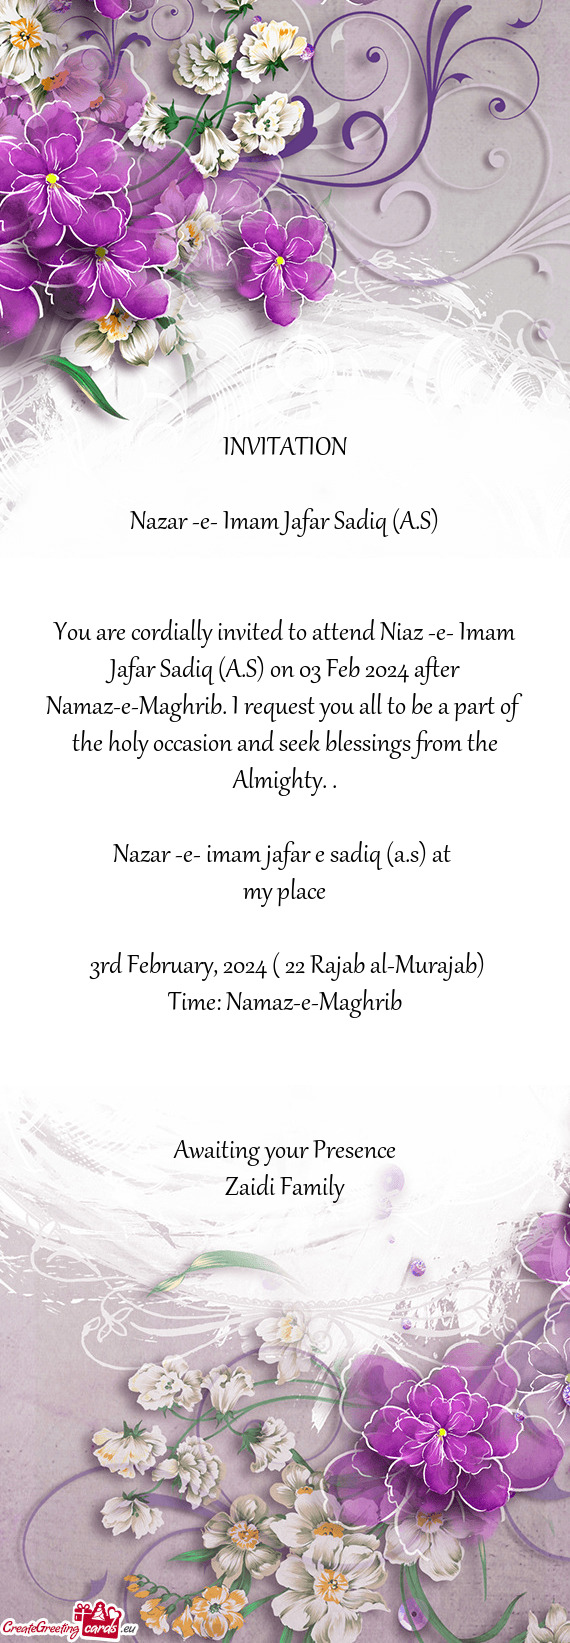 You are cordially invited to attend Niaz -e- Imam Jafar Sadiq (A.S) on 03 Feb 2024 after Namaz-e-Mag